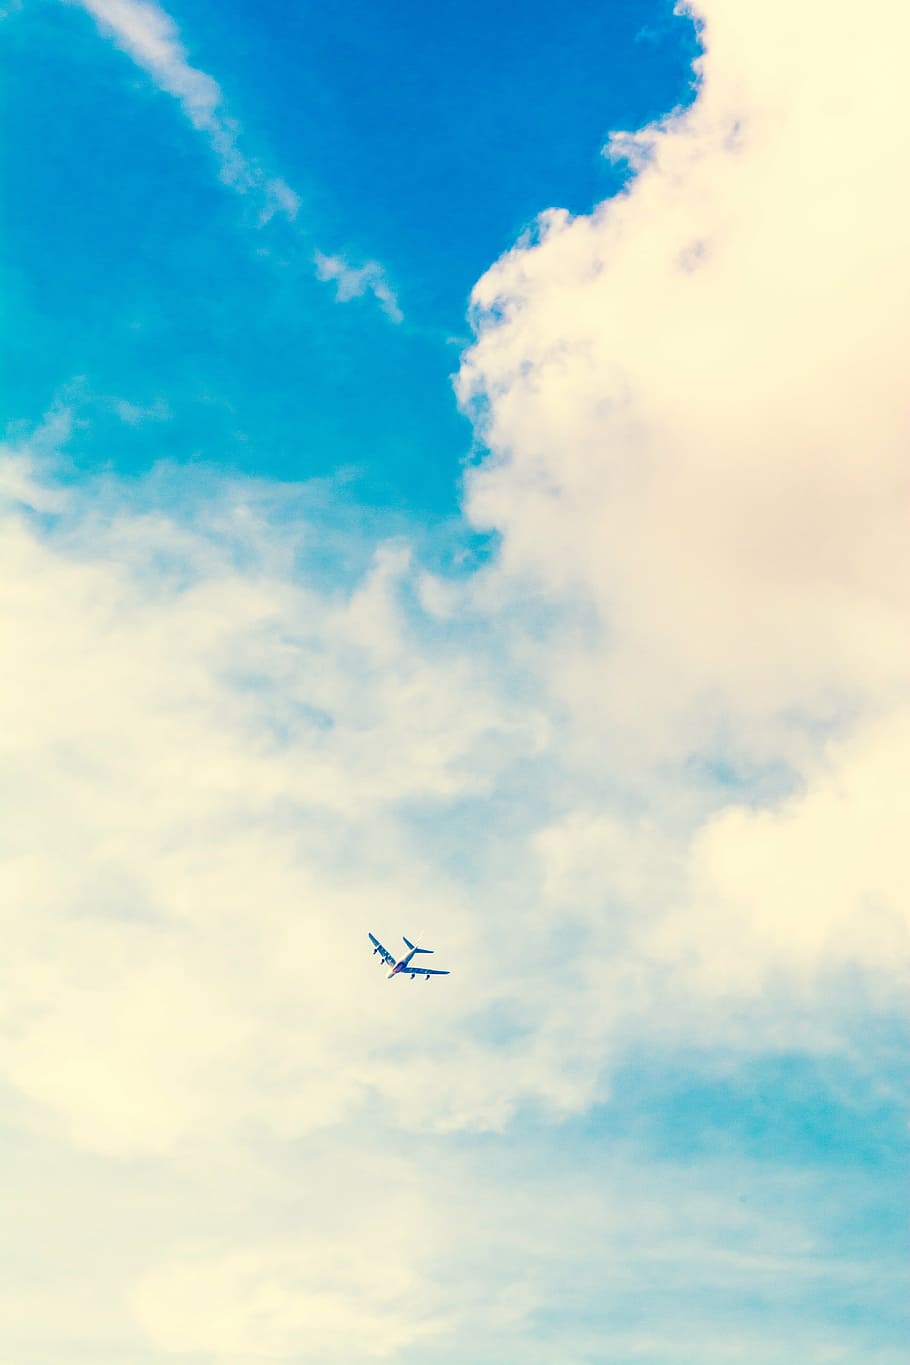 plane, flying, white, cloudy, sky, daytime, airplane, travel, adventure, vacation